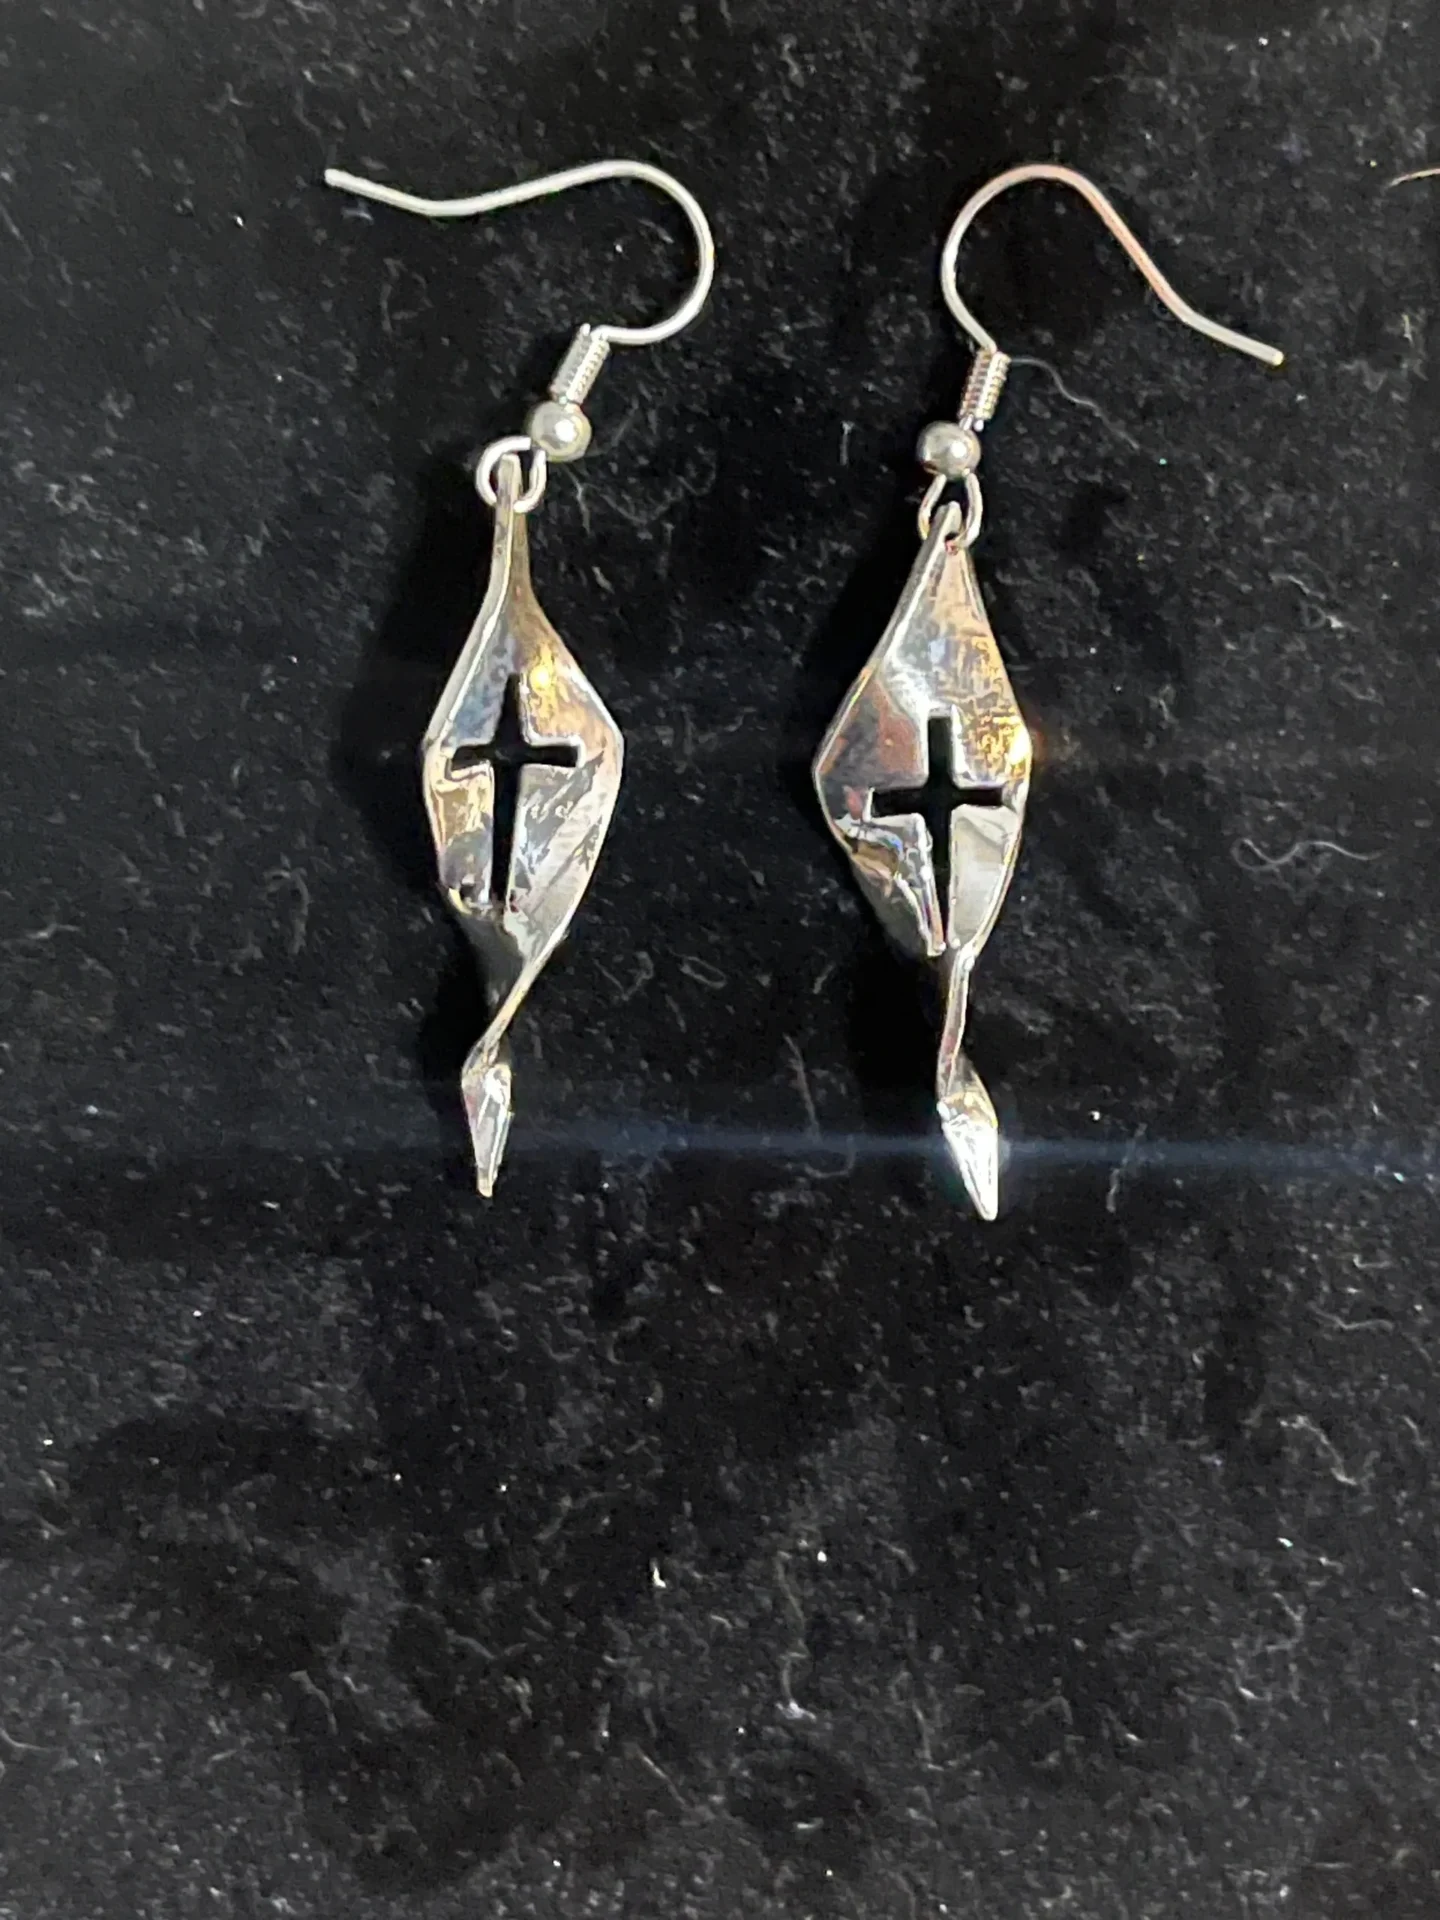 A pair of earrings with a cross on them.